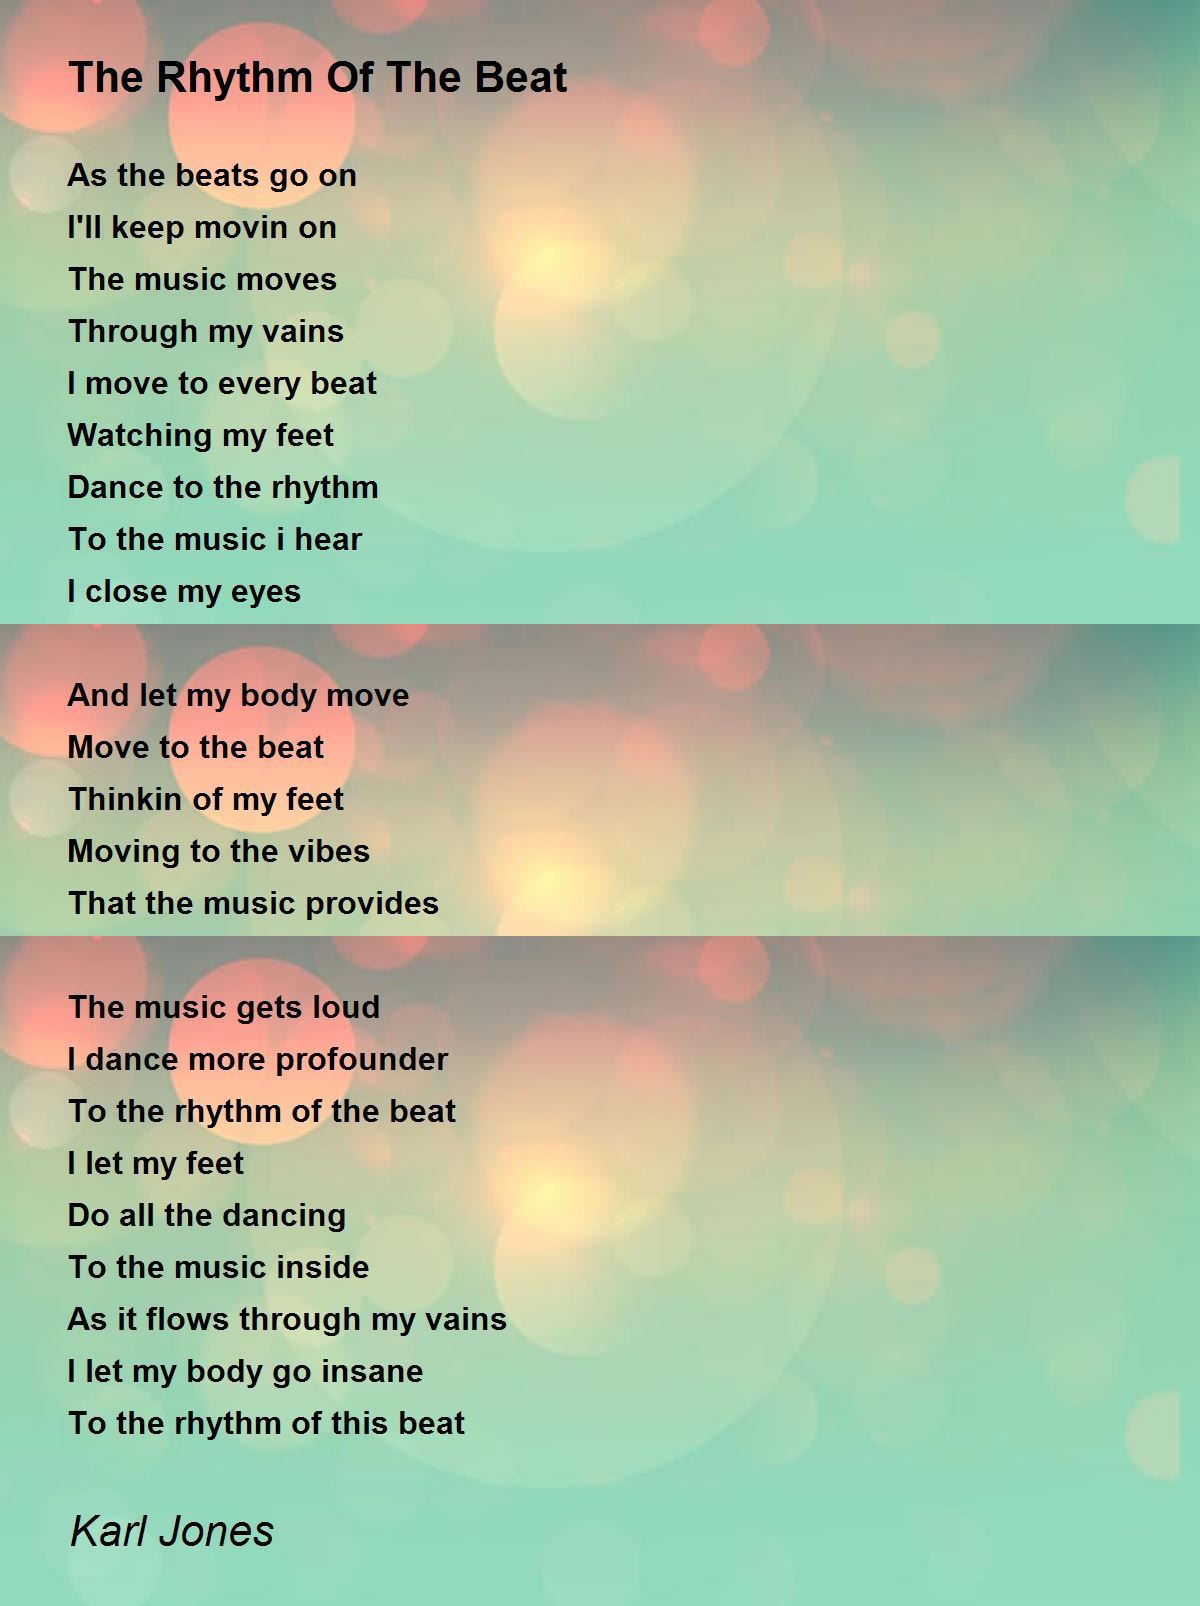 The Rhythm Of The Beat - The Rhythm Of The Beat Poem by